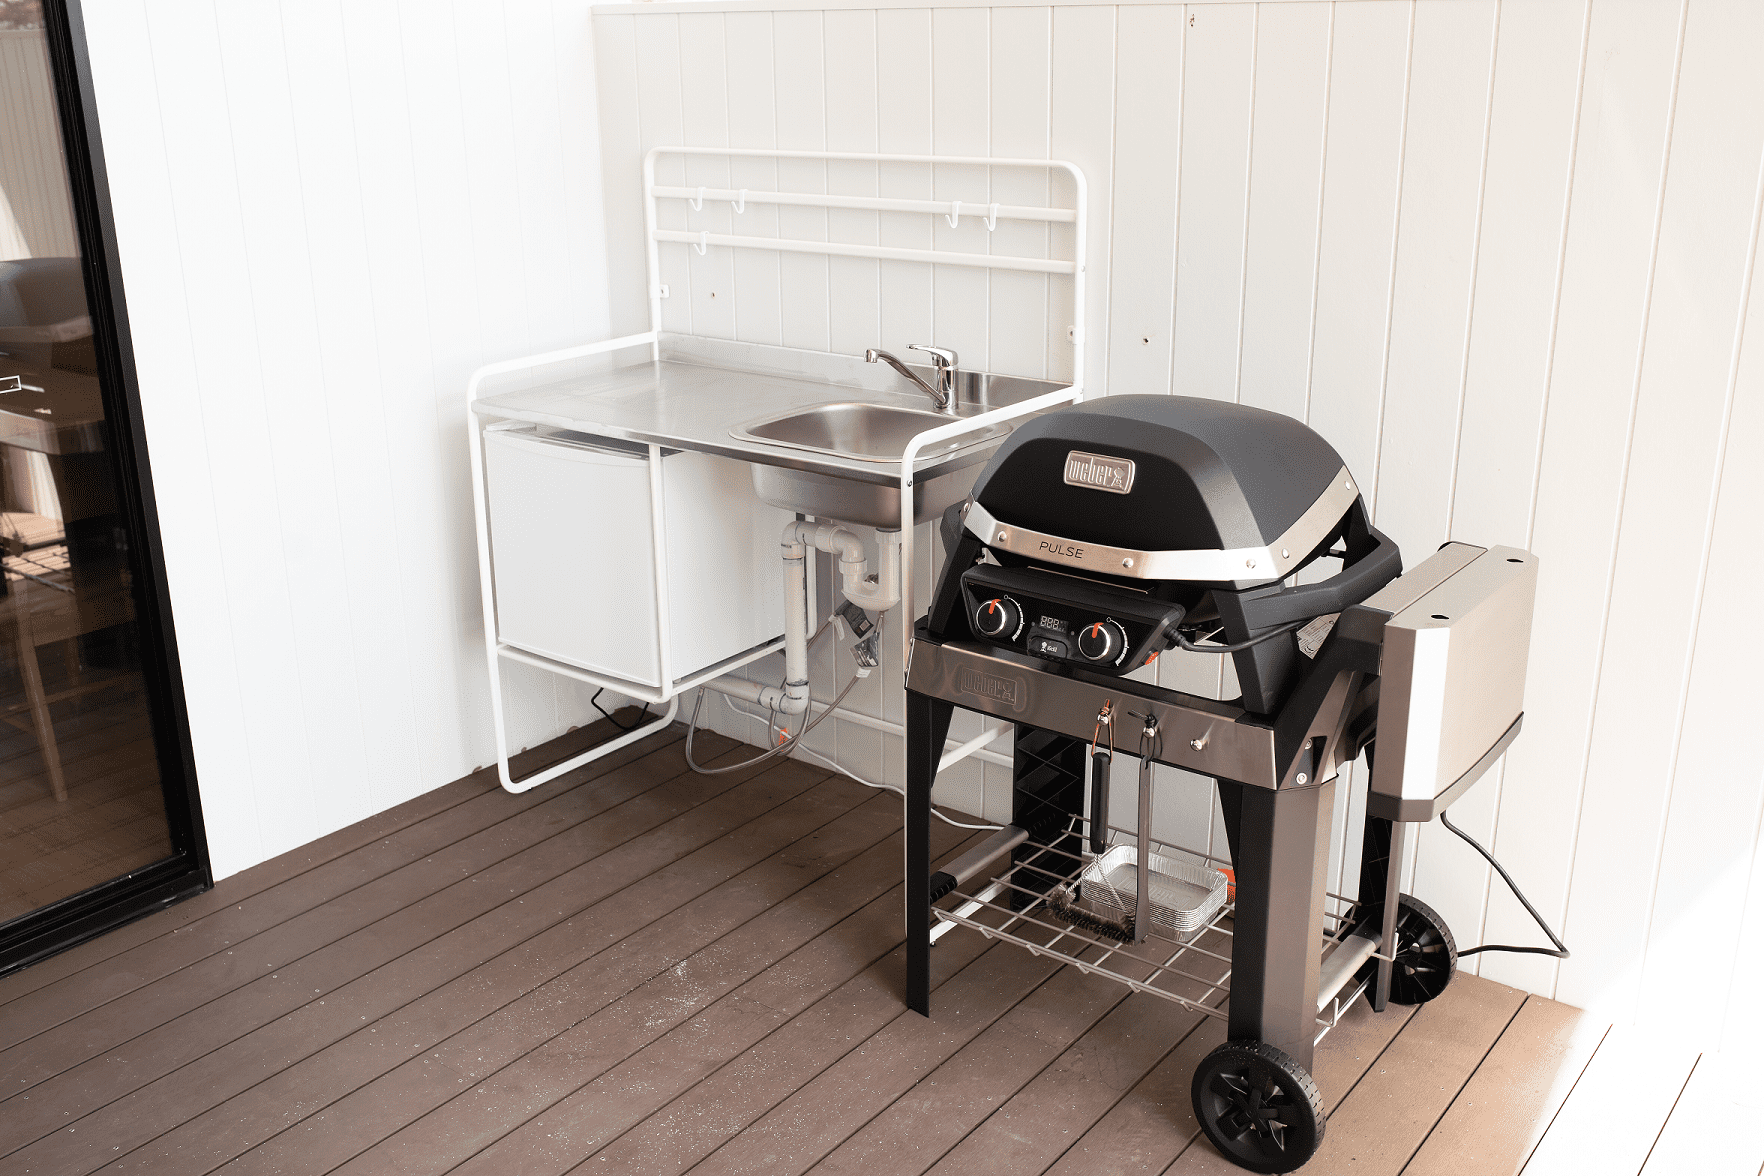 Outdoor electric BBQ and kitchenette